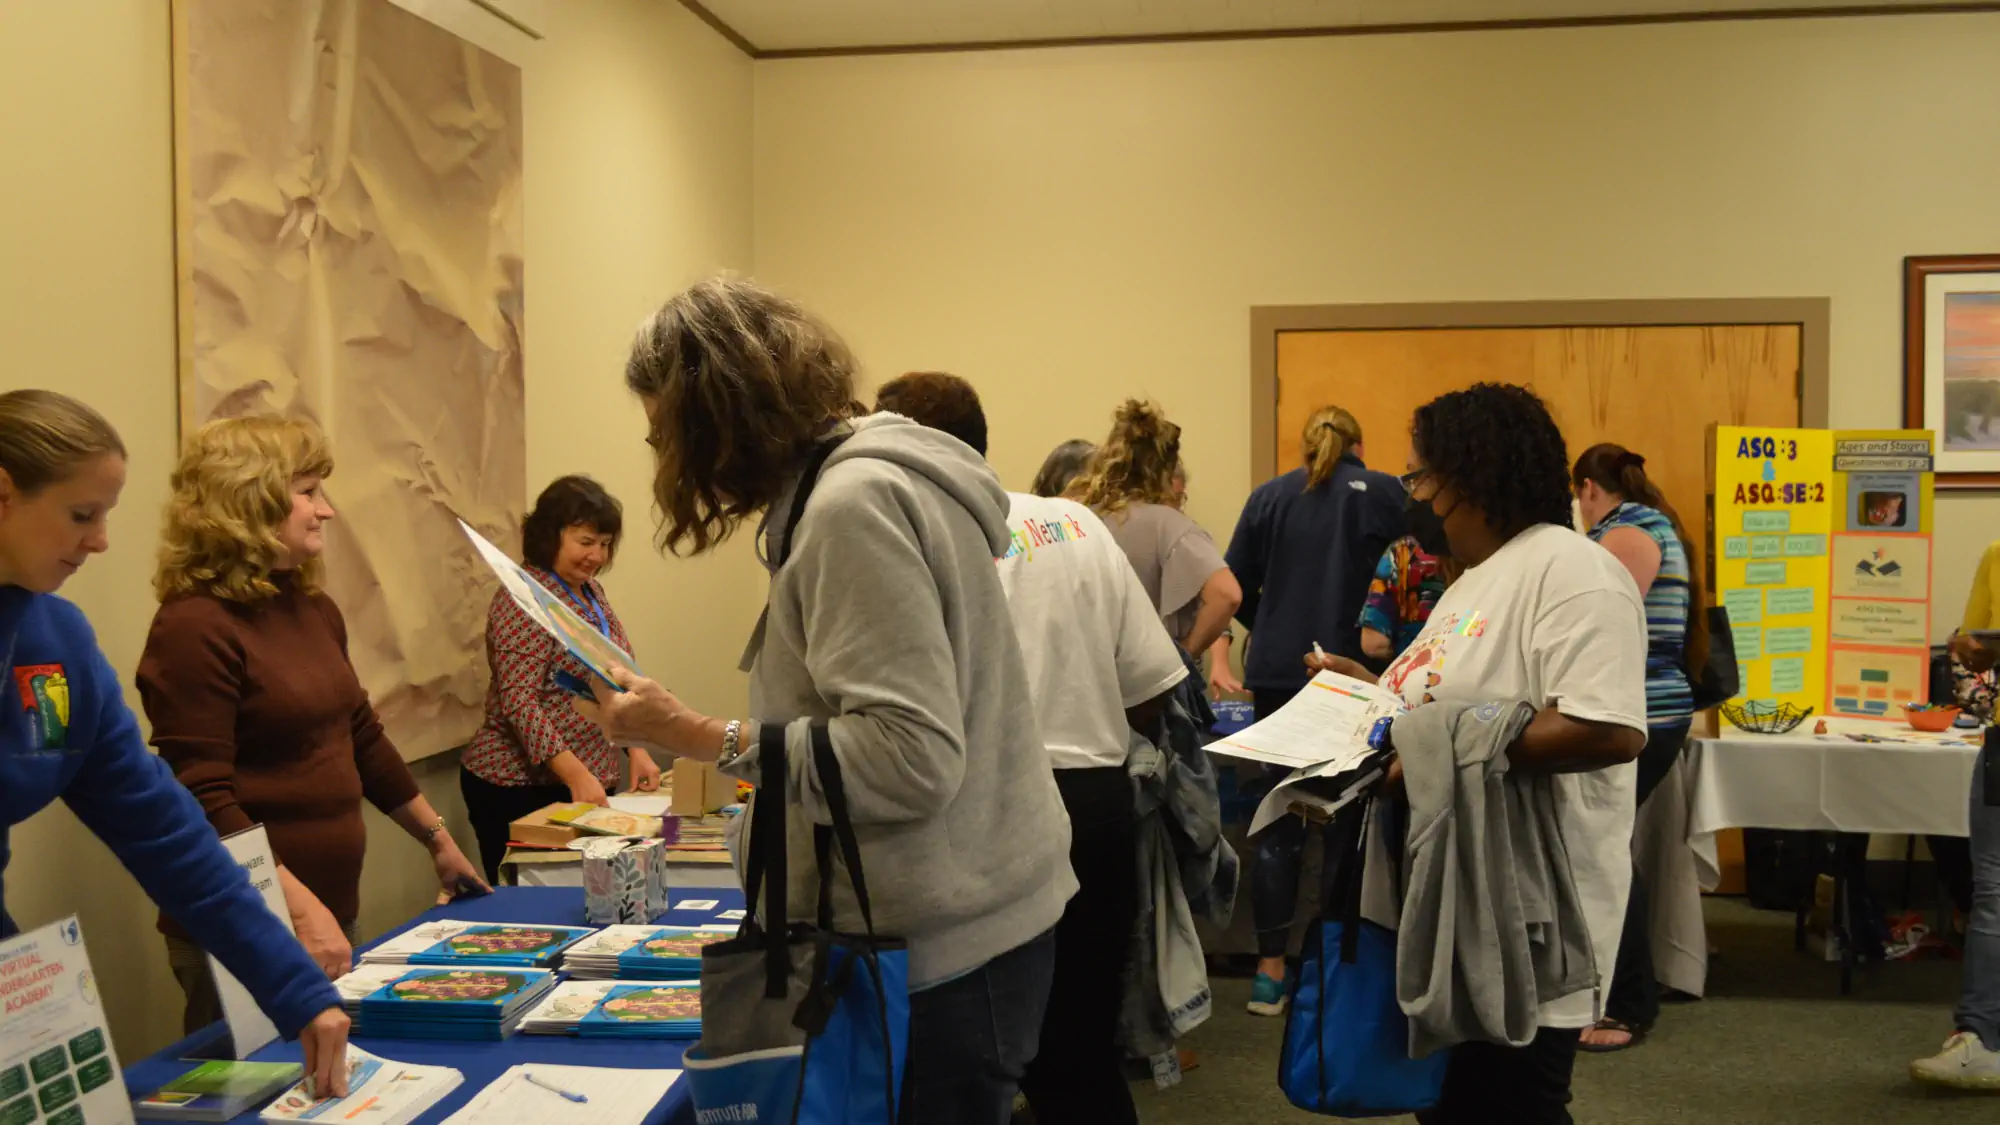 Participants check in for conference